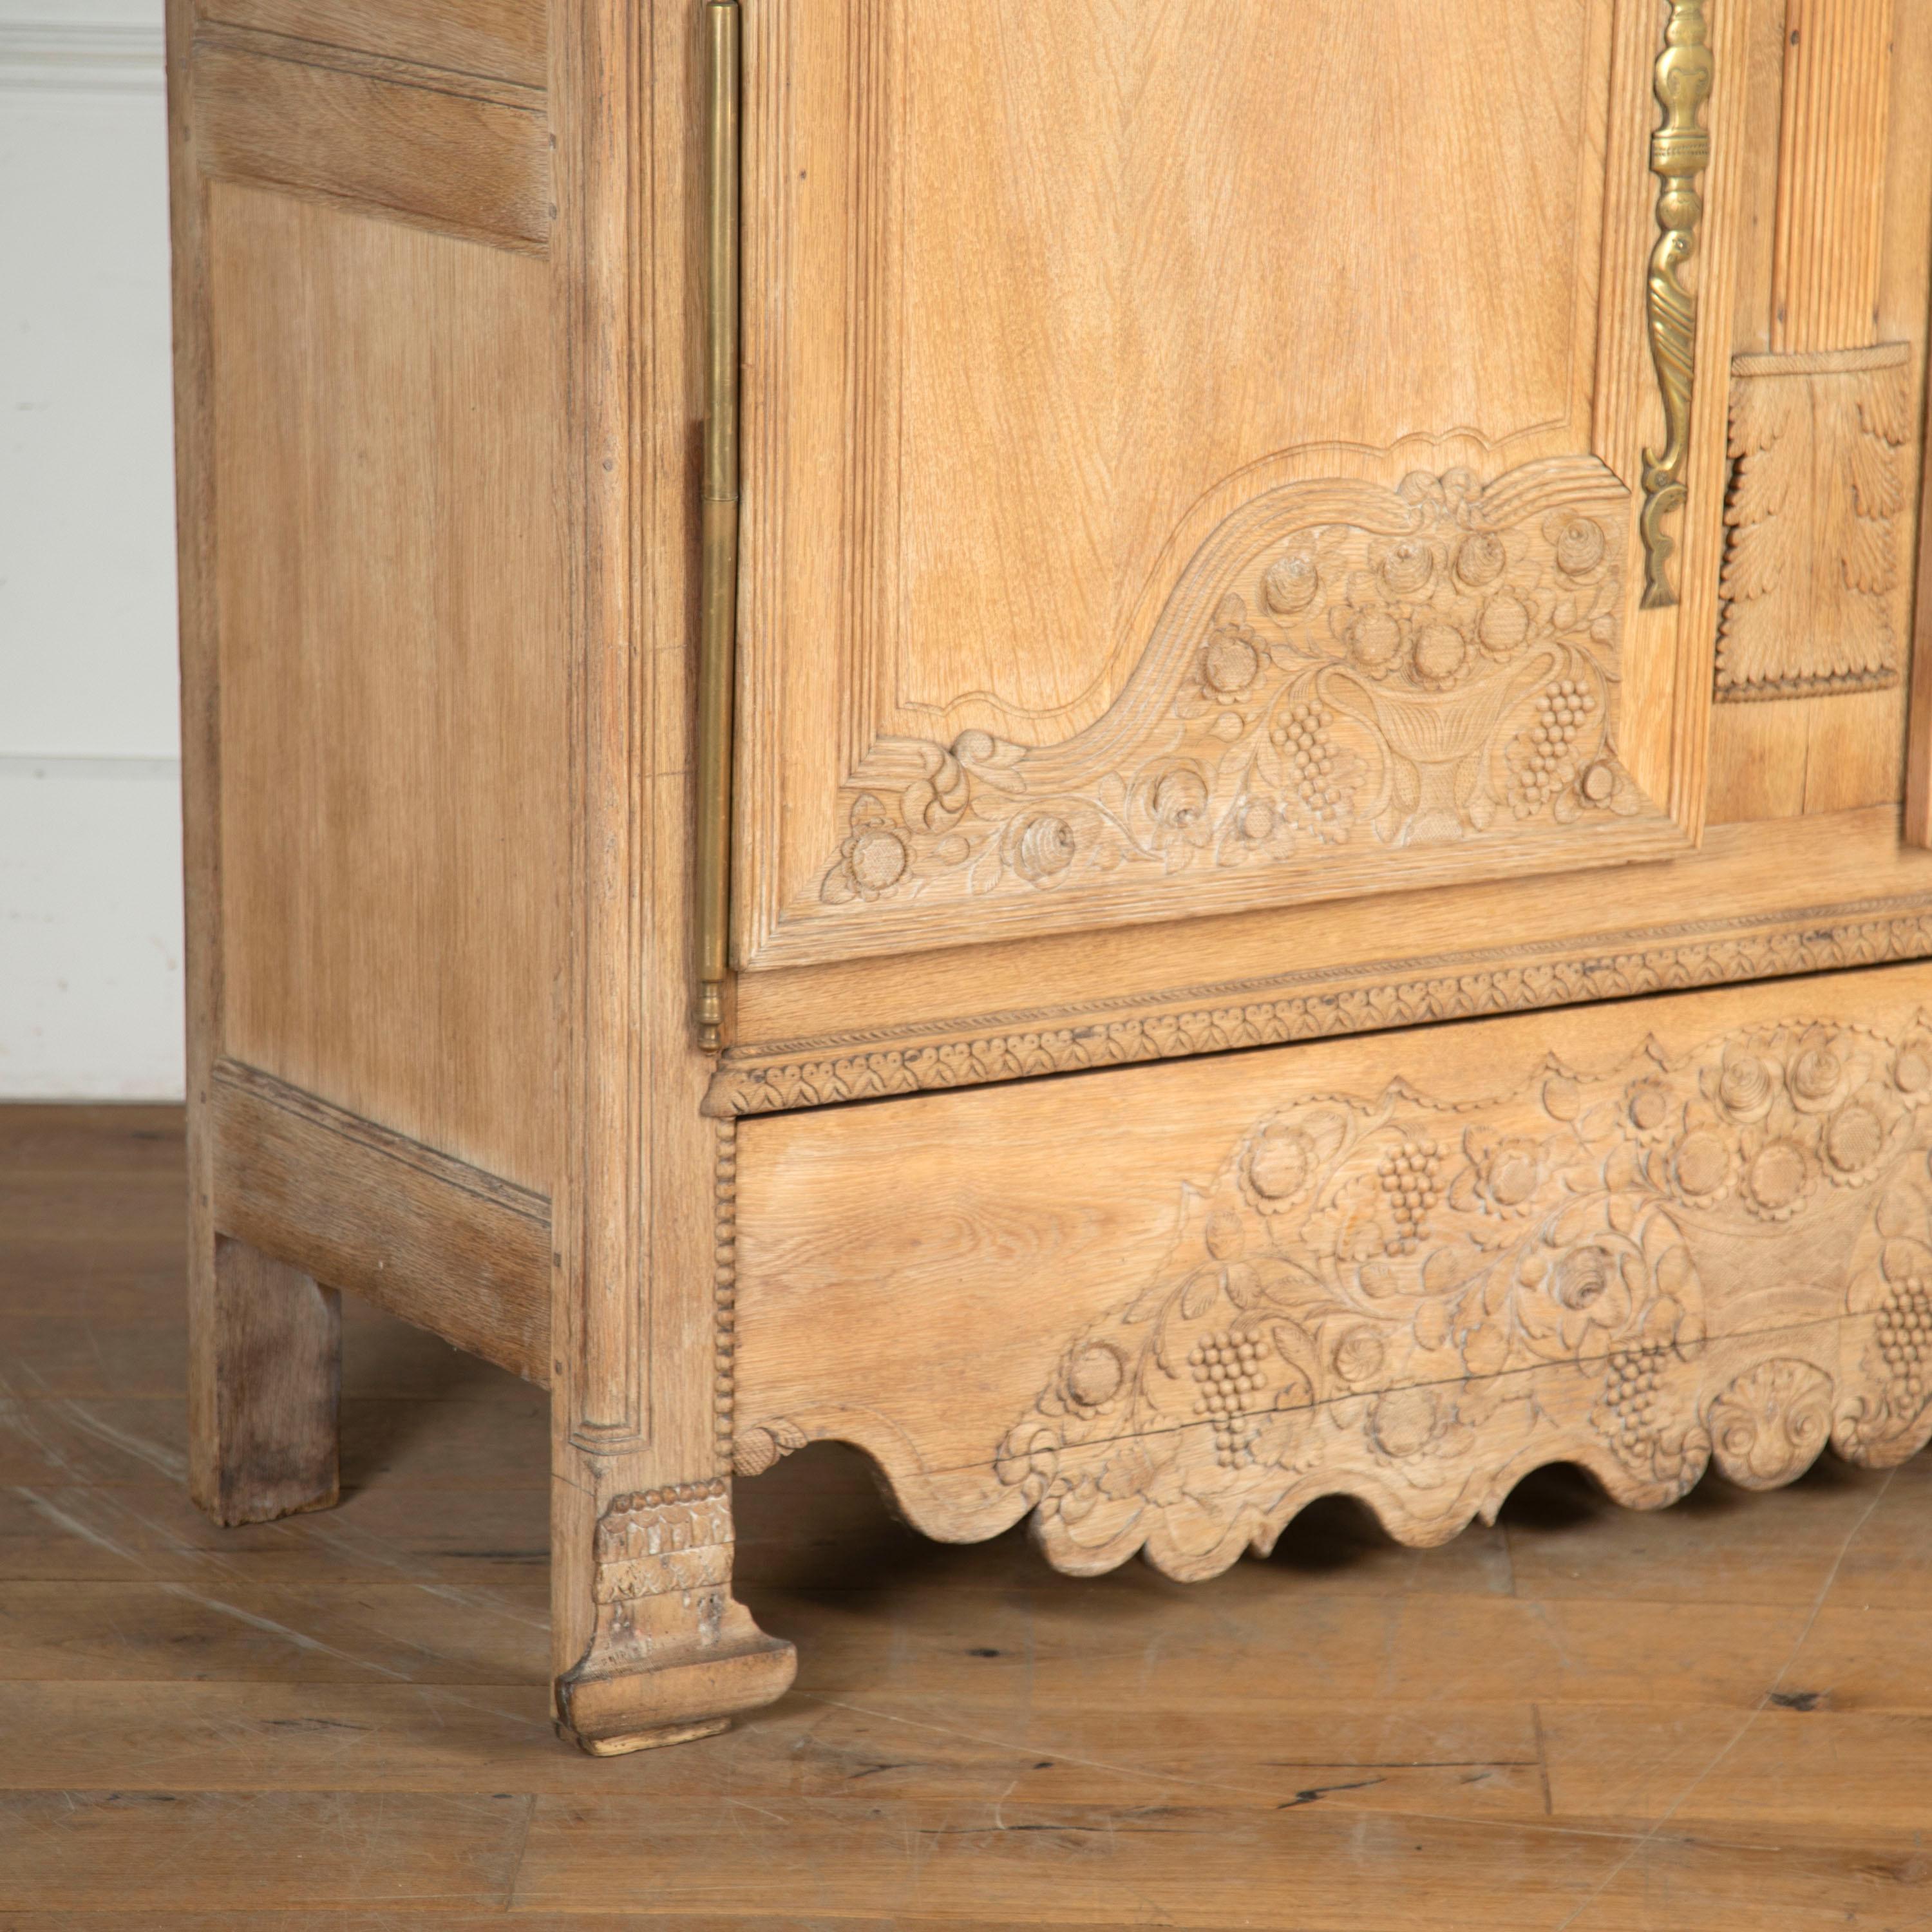 Large 19th century marriage armoire from Normandy. 

This fine quality hand-carved bleached oak armoire has been profusely carved with flowers and grapevines to represent a long, happy and fruitful marriage.

Fitted inside with three shelves,